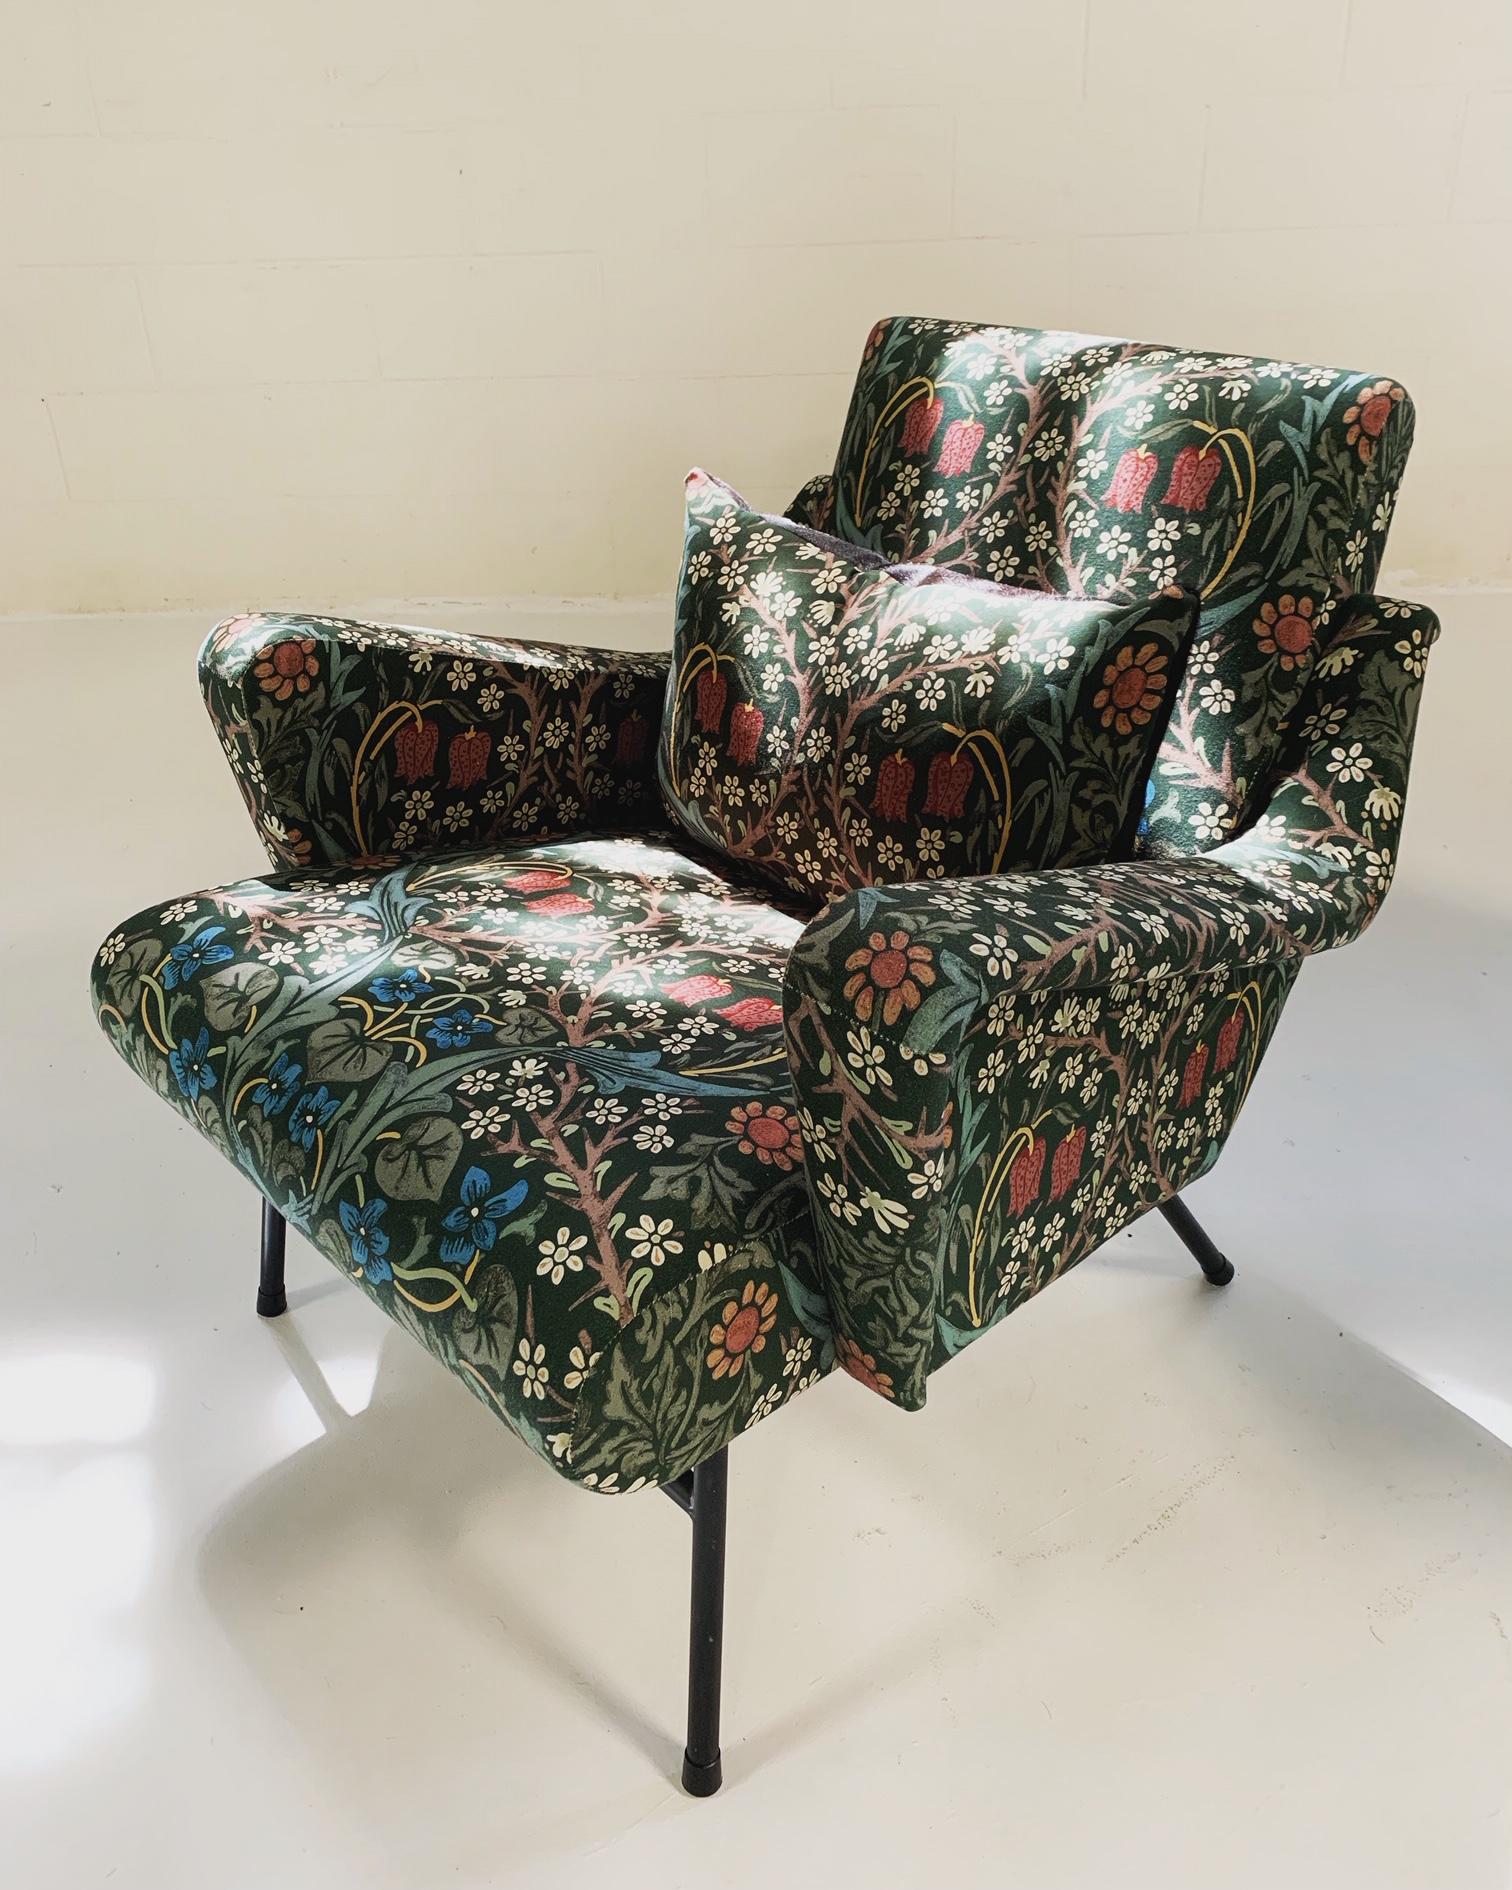 The traditional floral of William Morris on such a modern silhouette! We love it. The lines on these lounge chairs are so dramatic. The deep seat and structured arms are exceptionally comfortable. We also designed a feather-filled lumbar pillow for